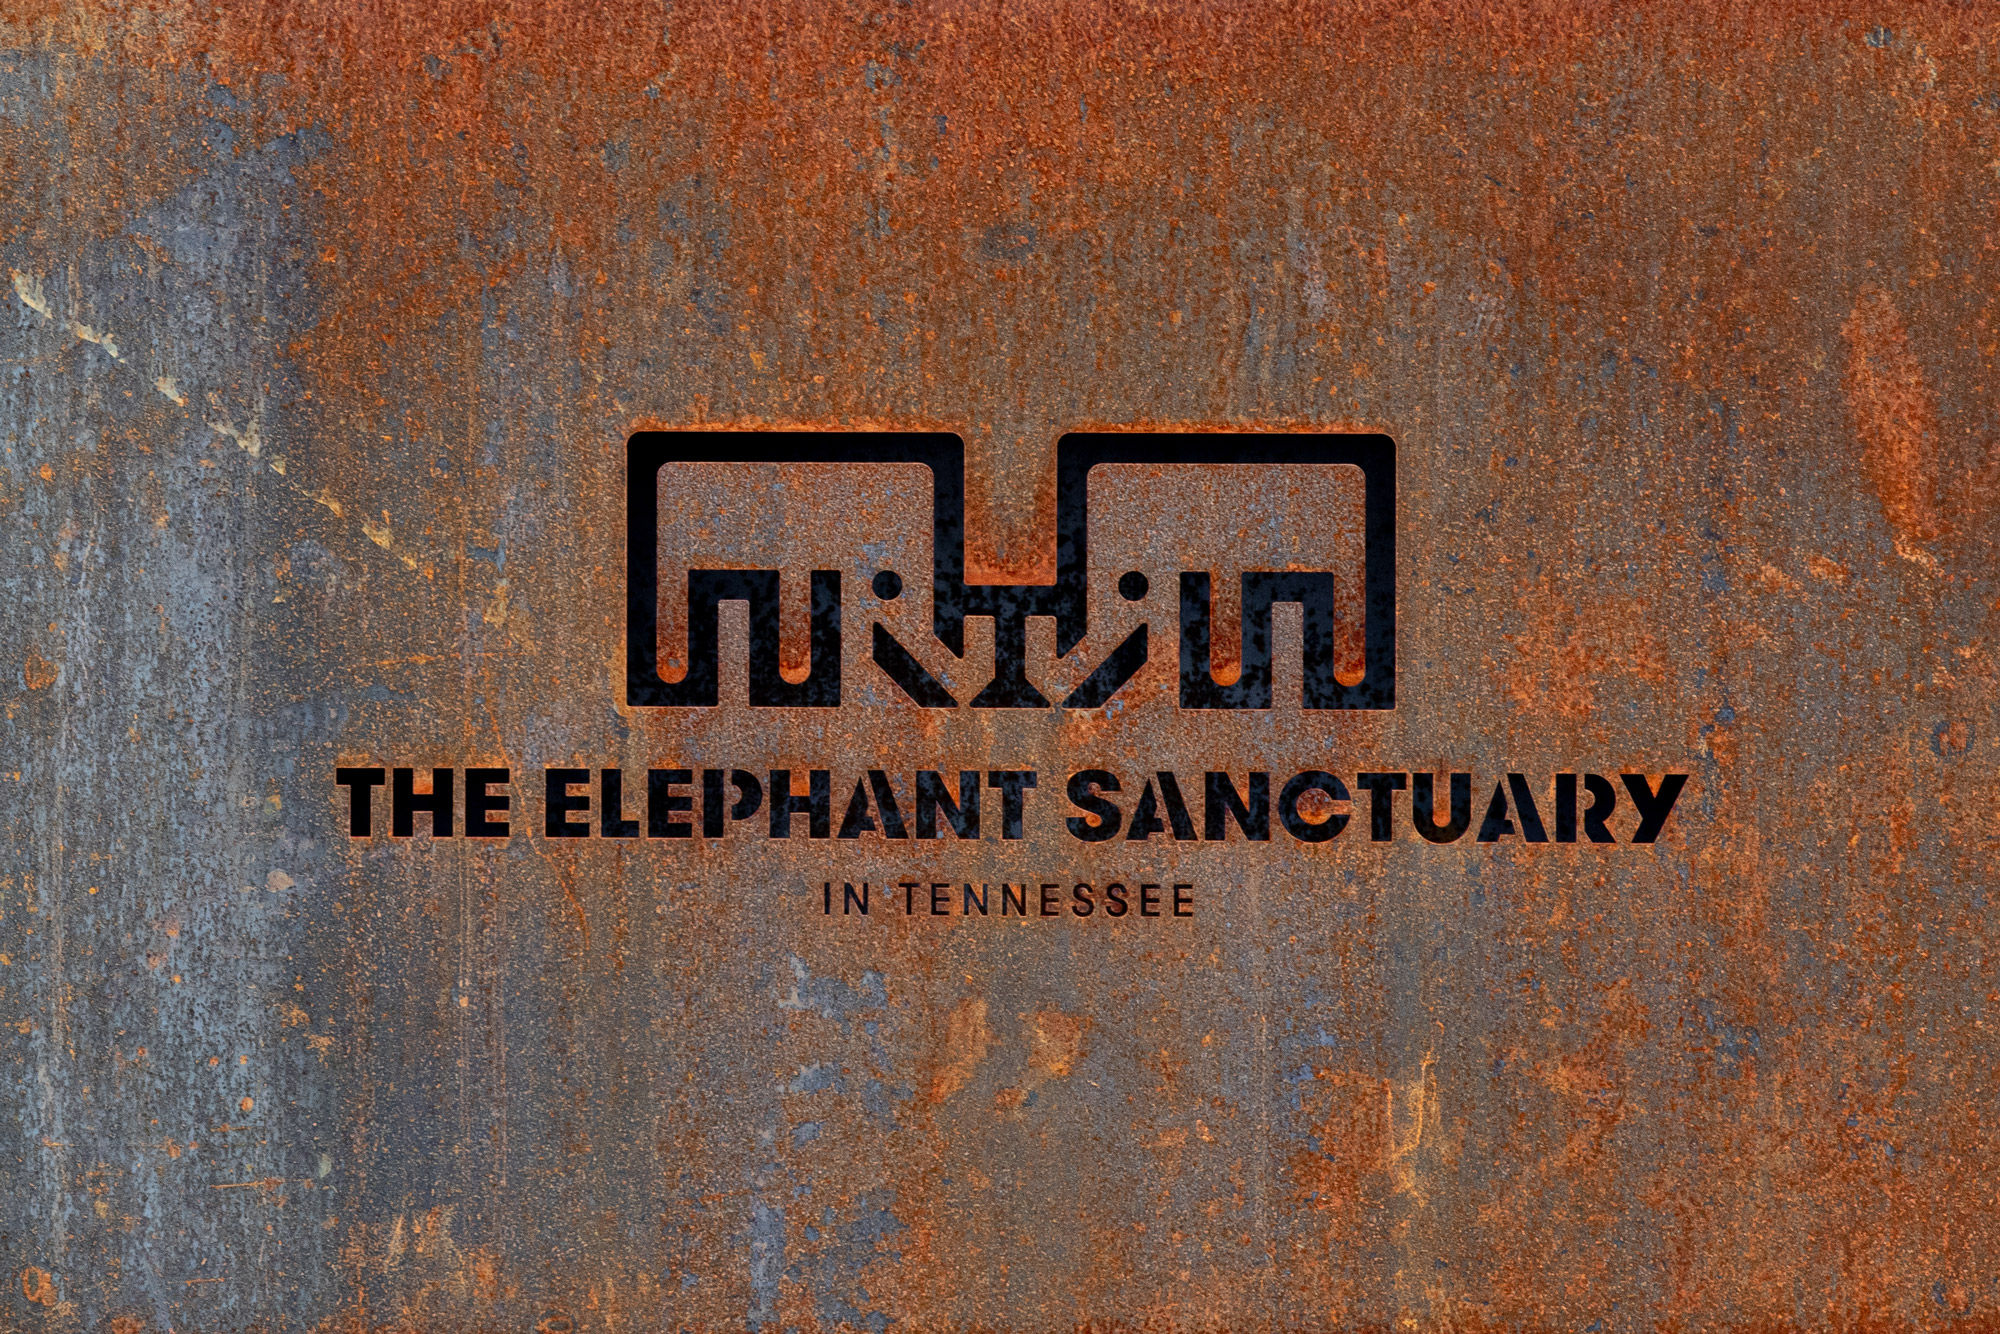 The Elephant Sanctuary in Tennessee logo